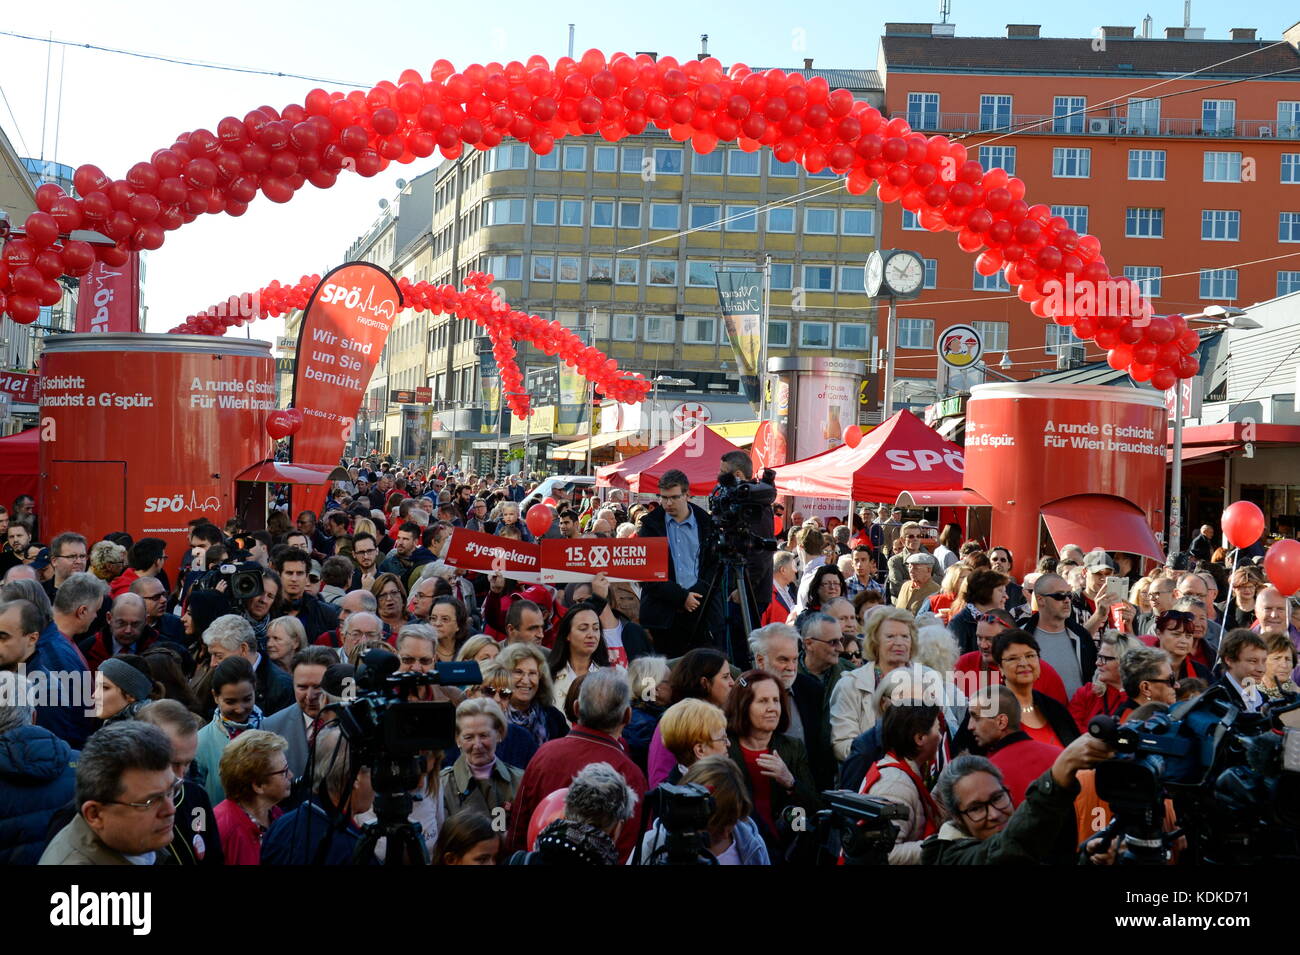 Vienna, Austria. 14 October 2017. Final rally of the SPÖ (Social Democratic Party of Austria) at the Viktor Adler market. Picture shows supporters of the SPÖ".  .Credit: Franz Perc / Alamy Live News Stock Photo